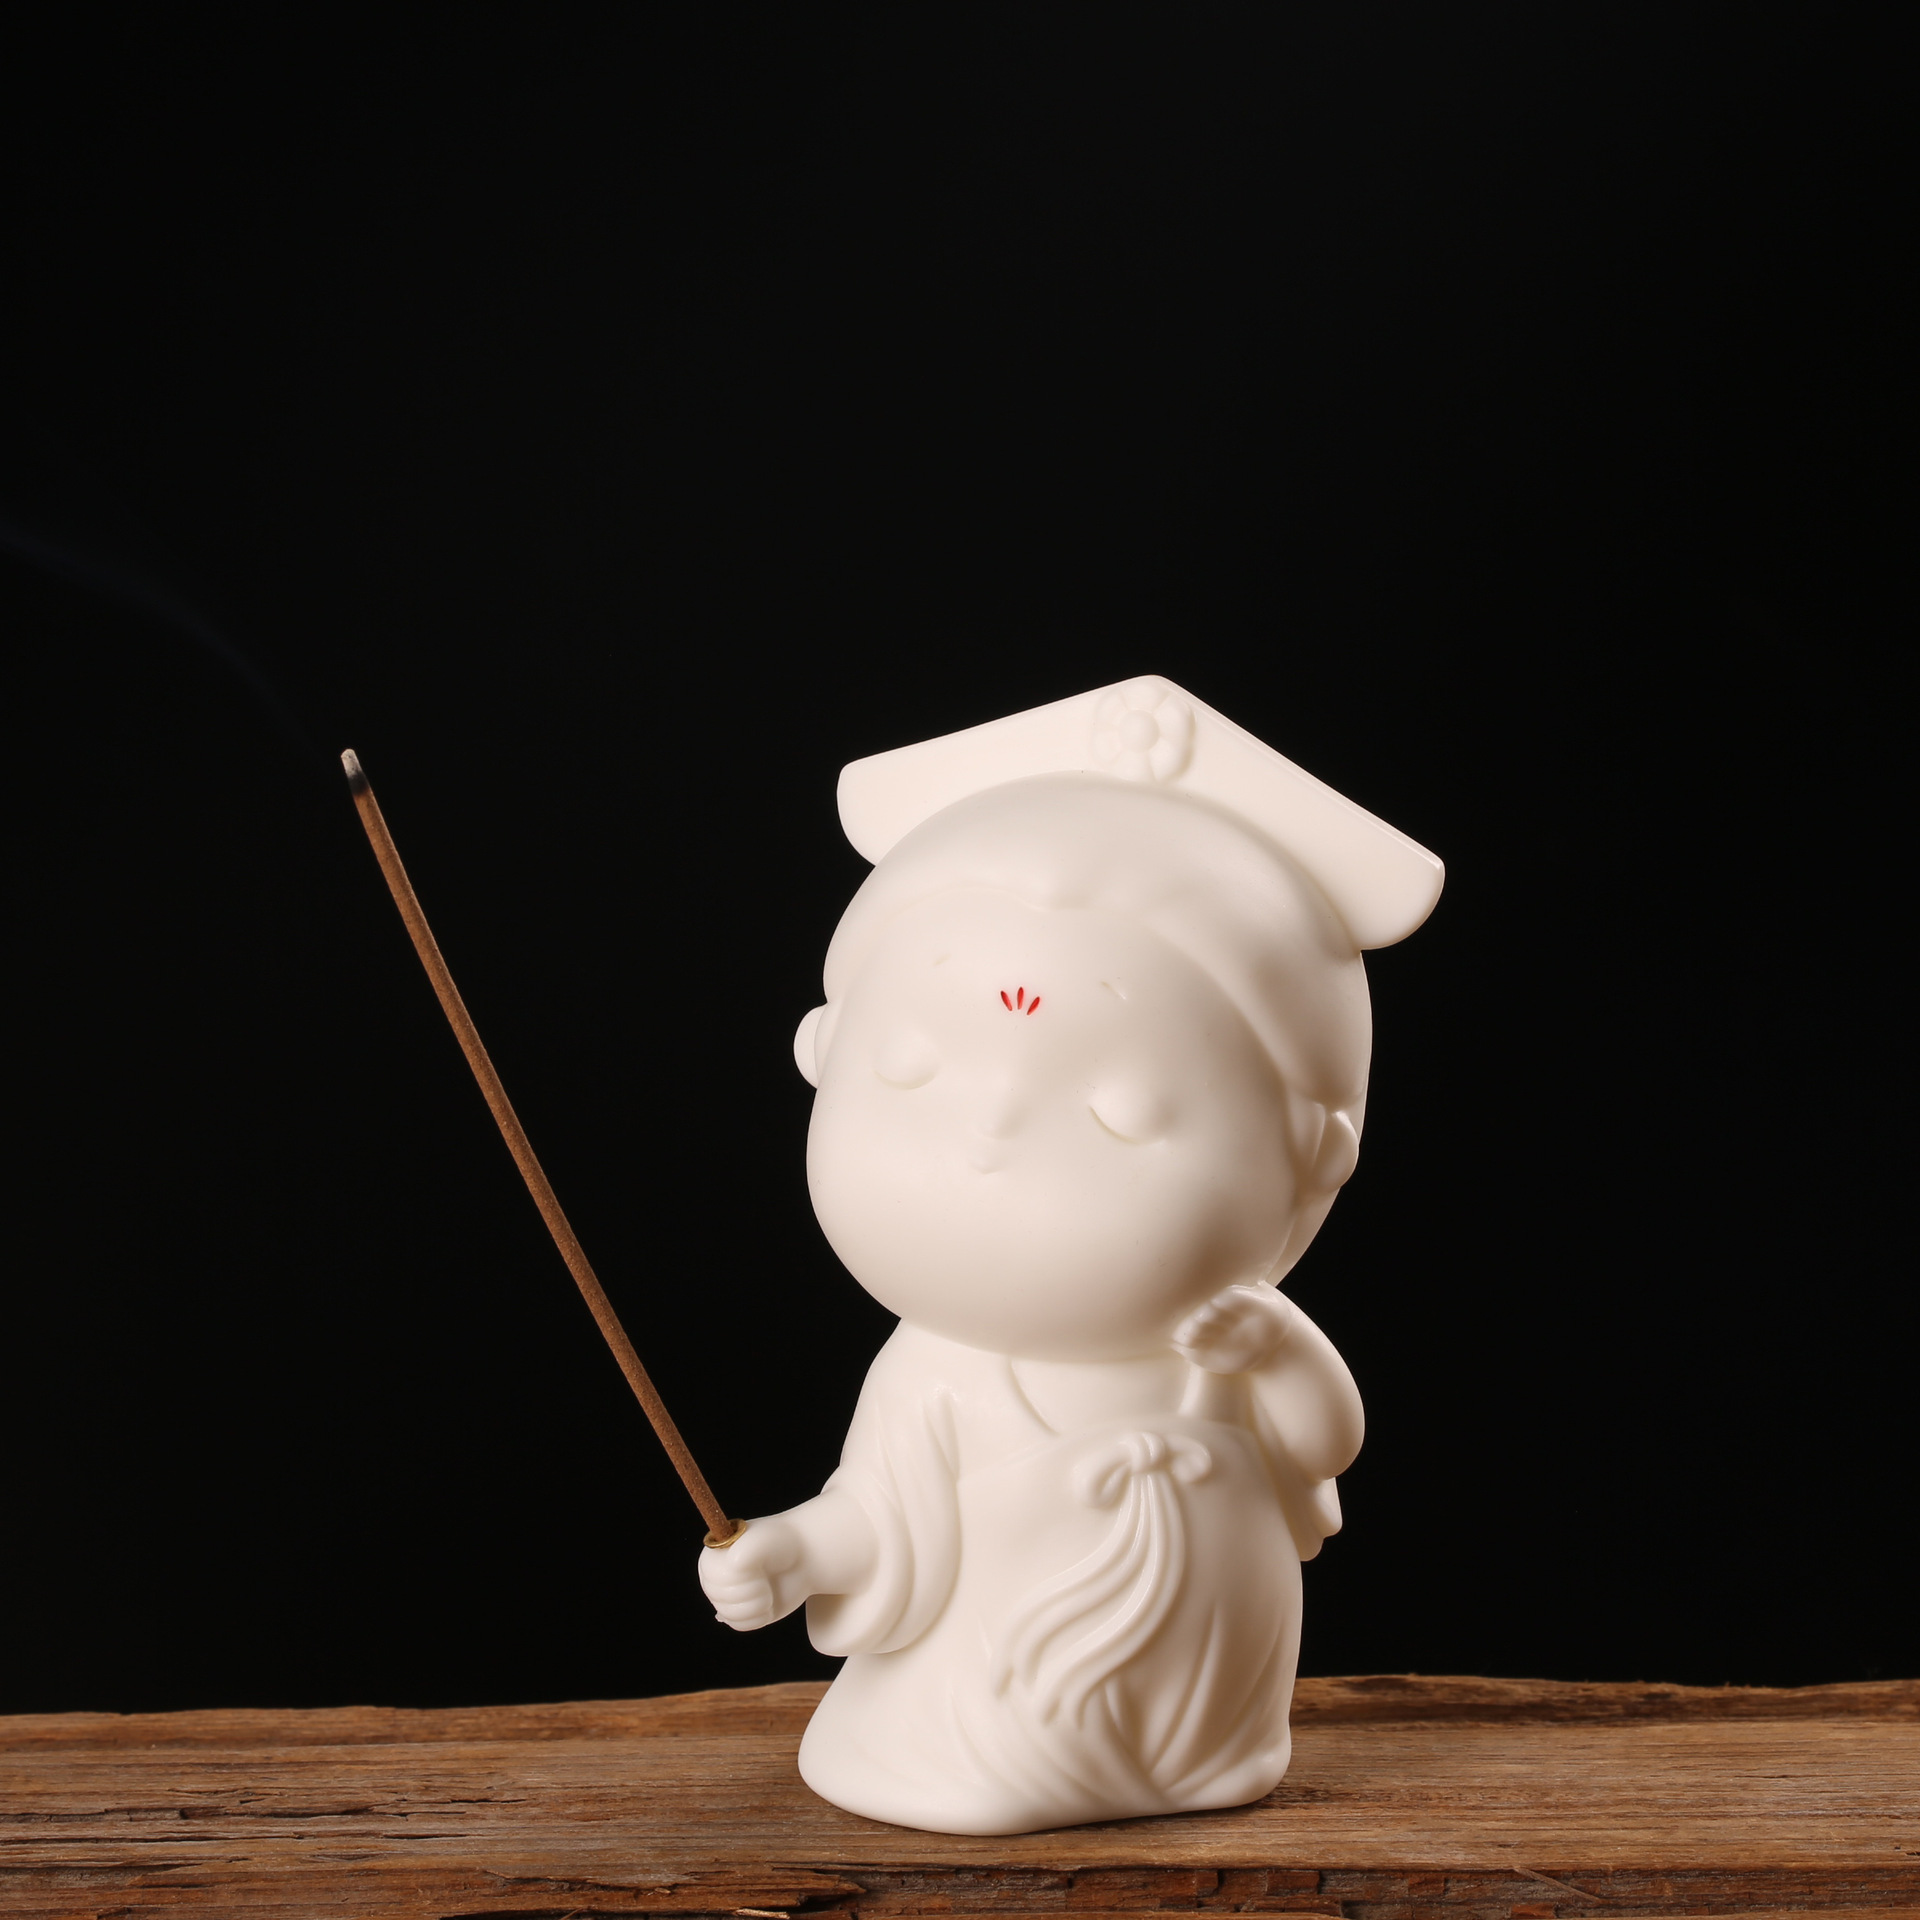 Xiao Gong'e Incense Insert - White Porcelain Touching Noodles (Send Thread Incense)